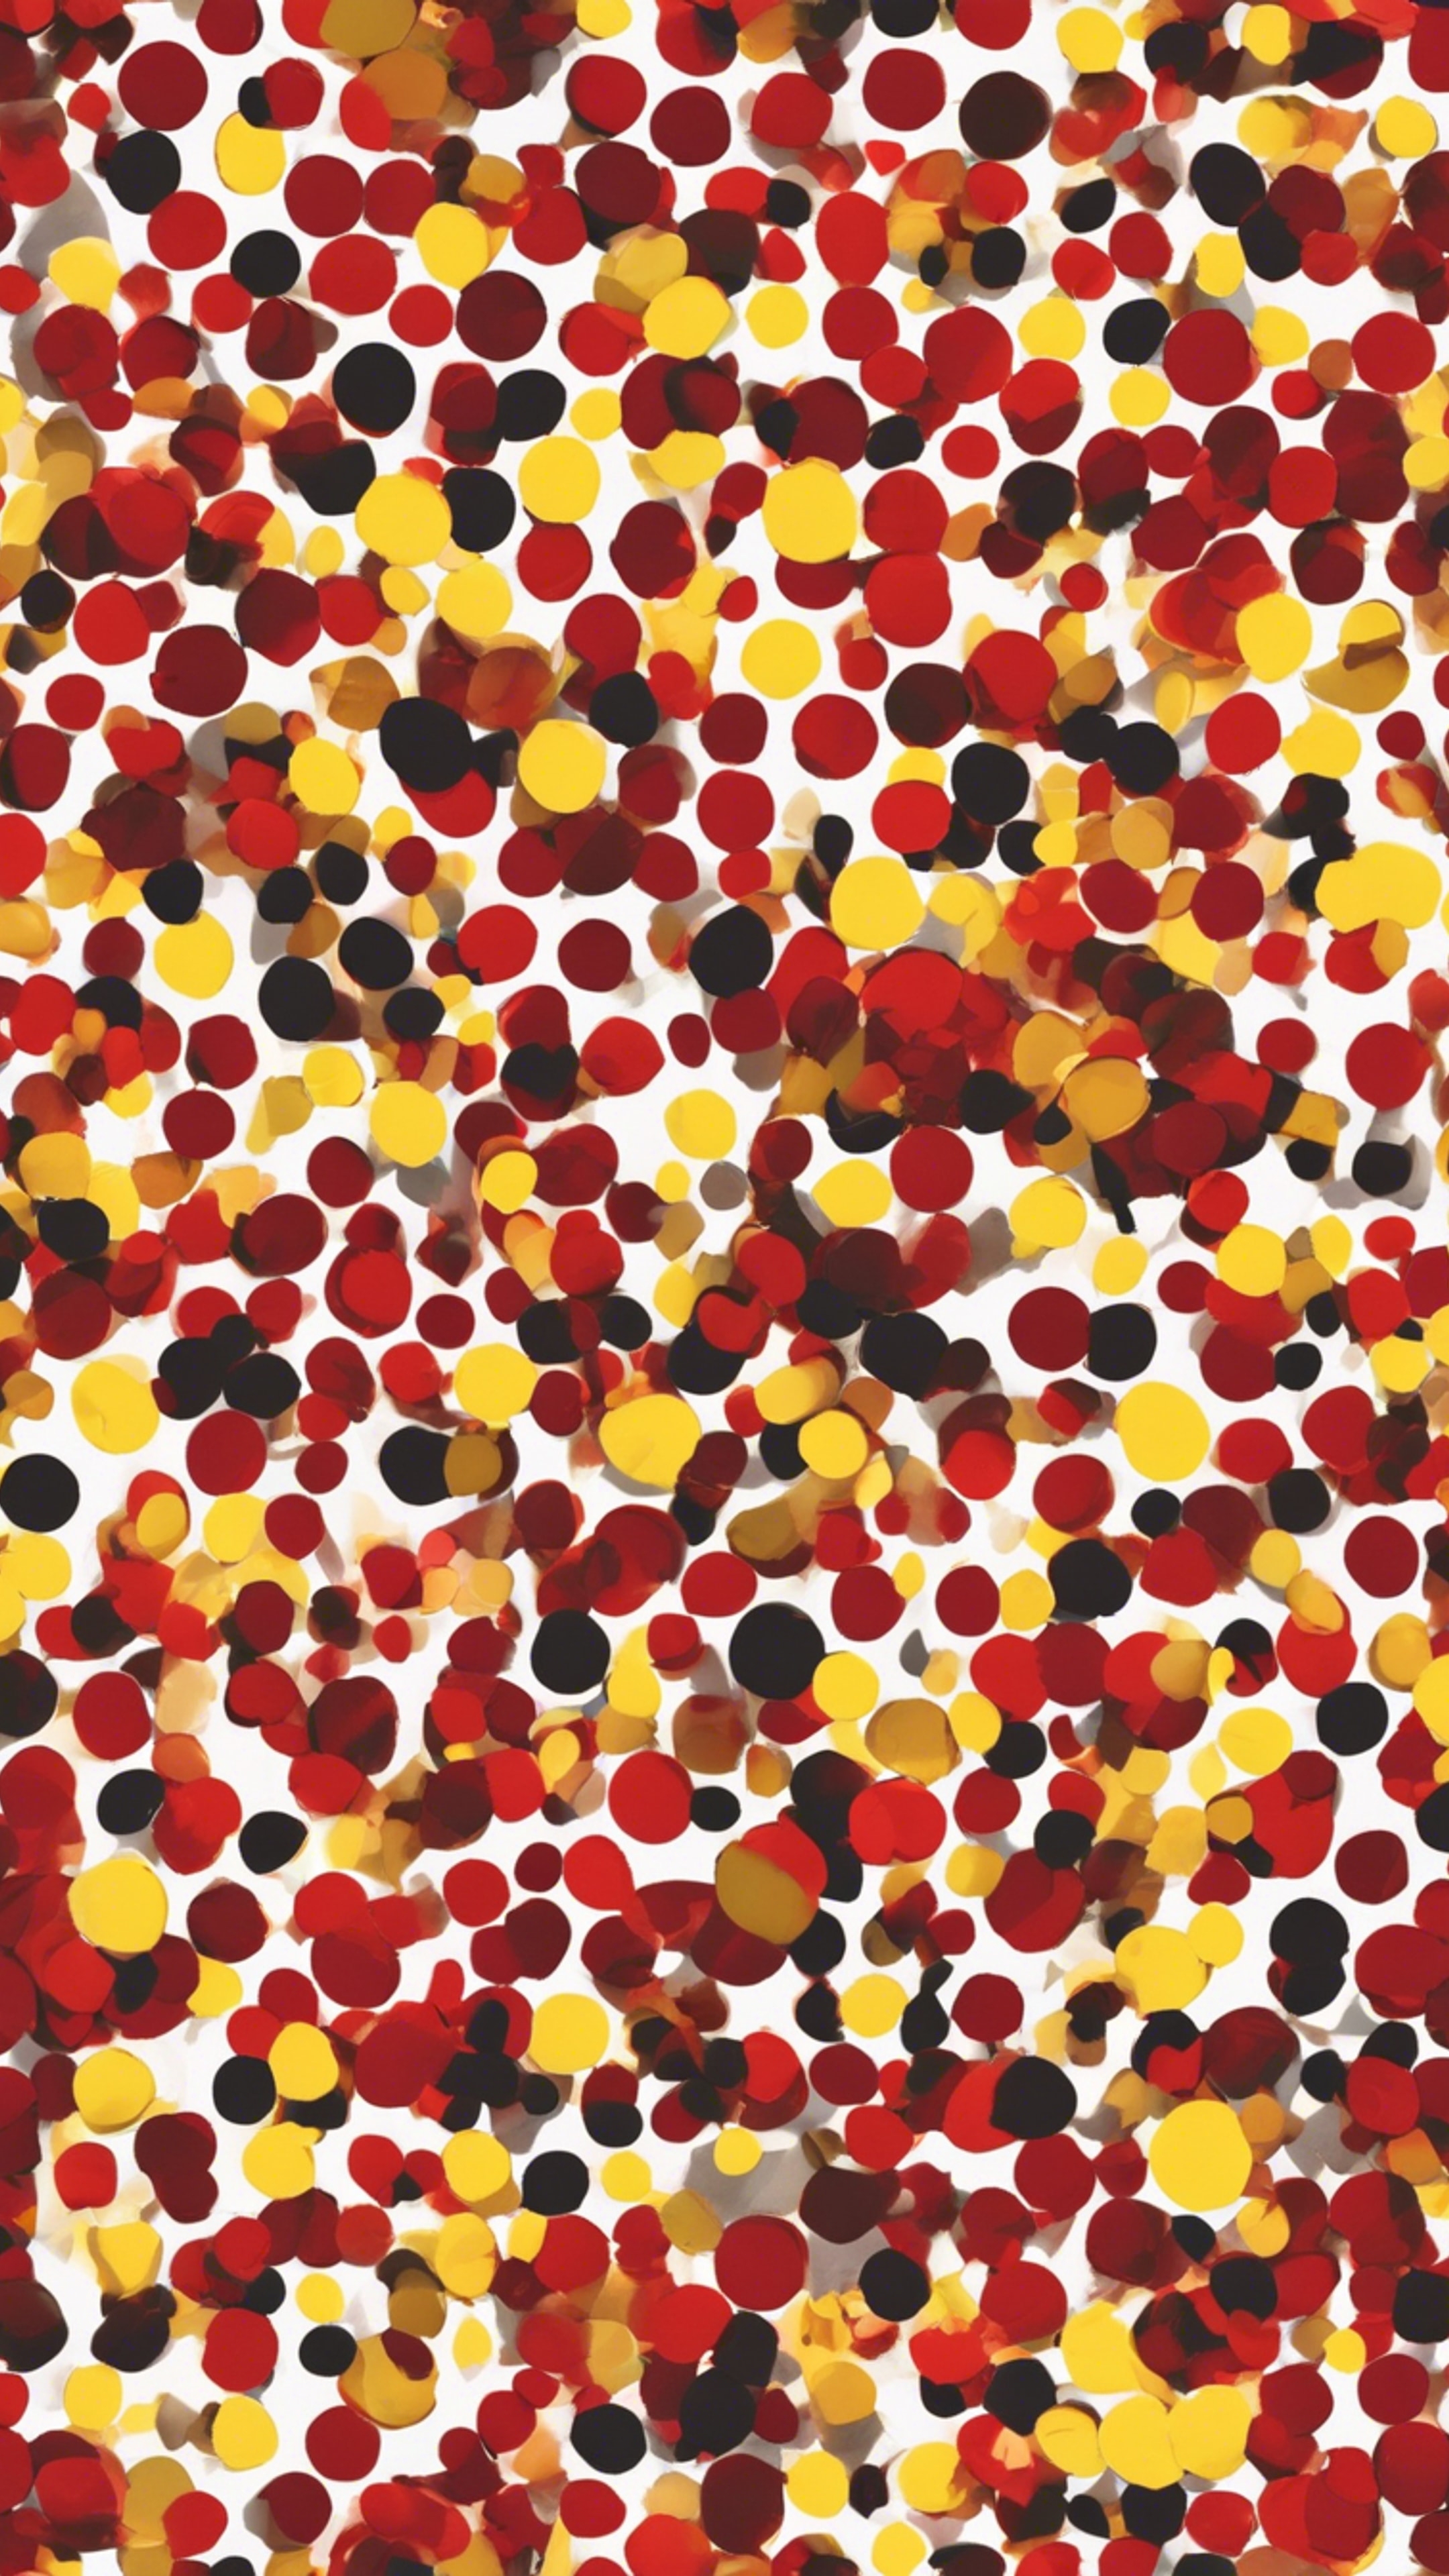 Scattered polka dots, small red ones and large yellow ones, in a seamless pattern.壁紙[491989b84cbb438494fe]